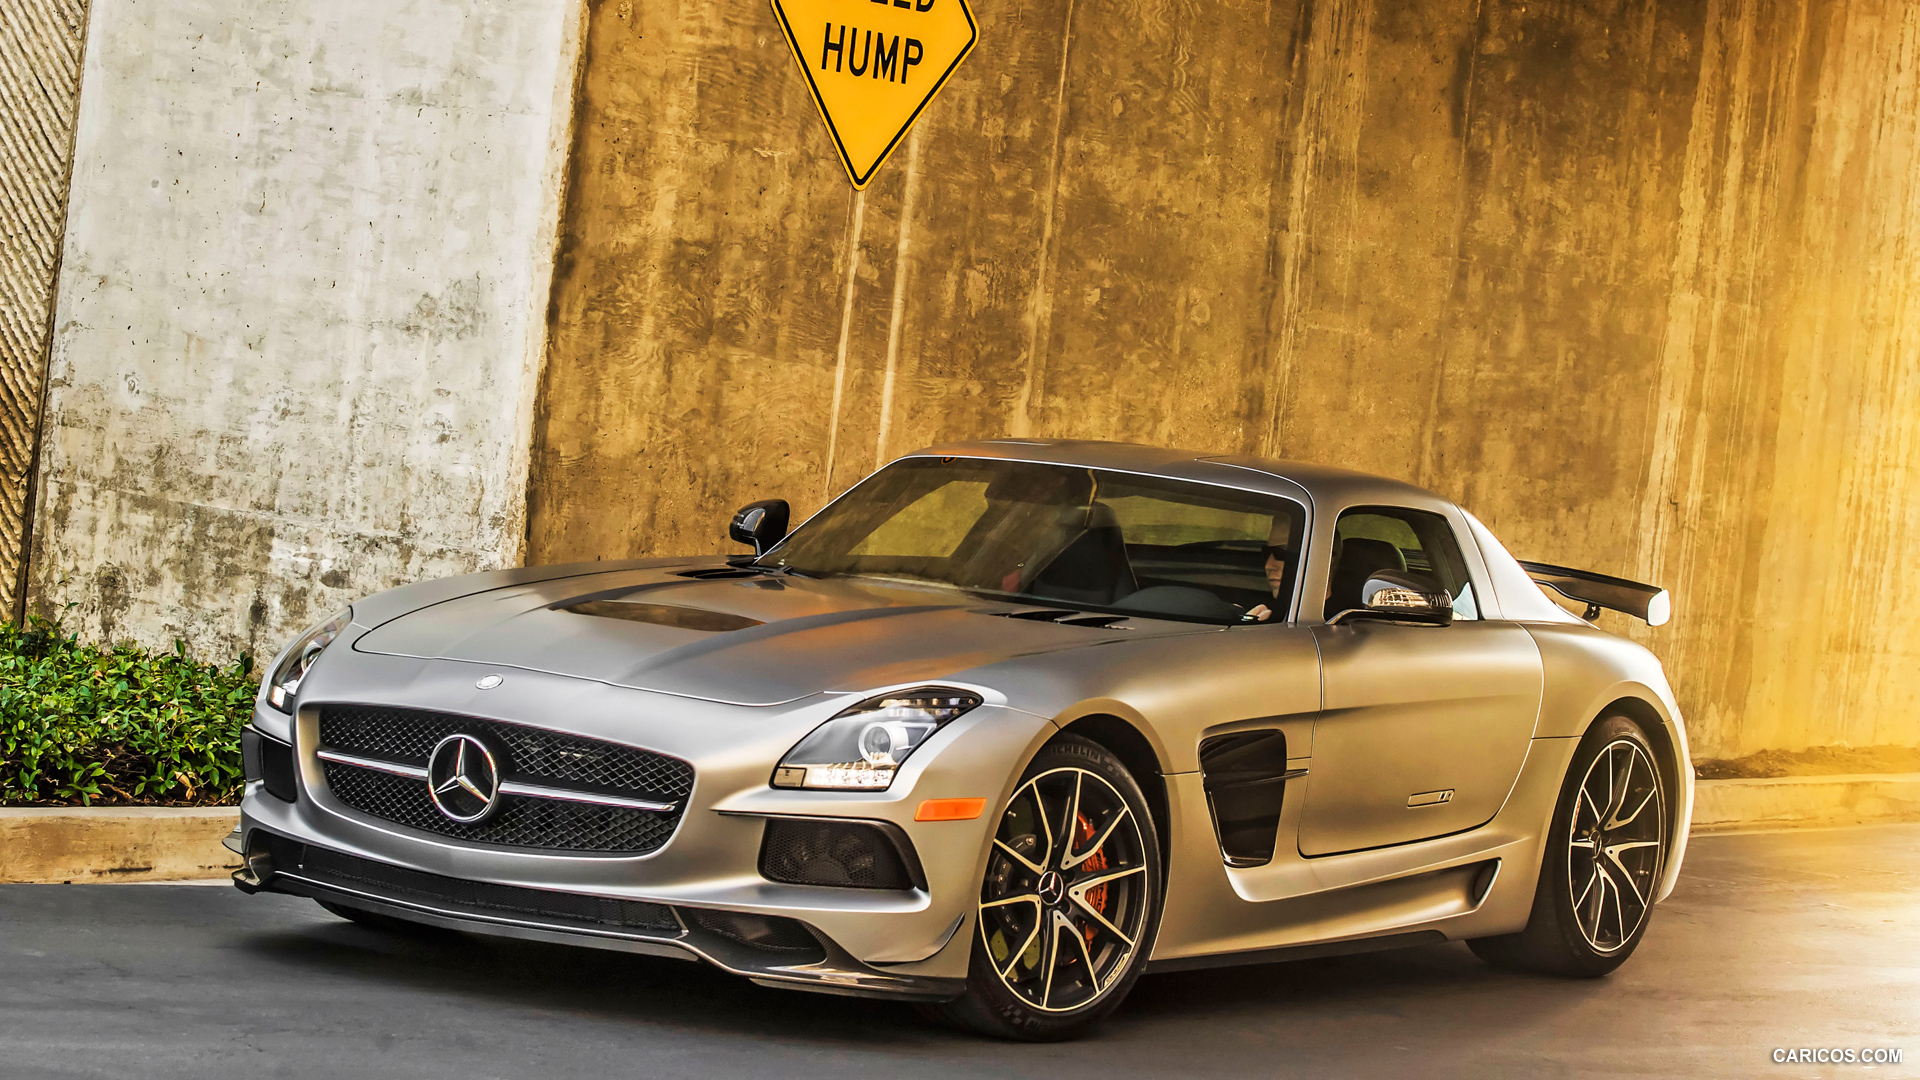 2014 Mercedes-Benz SLS AMG Coupe Black Series (US Version)  - Front, #29 of 40